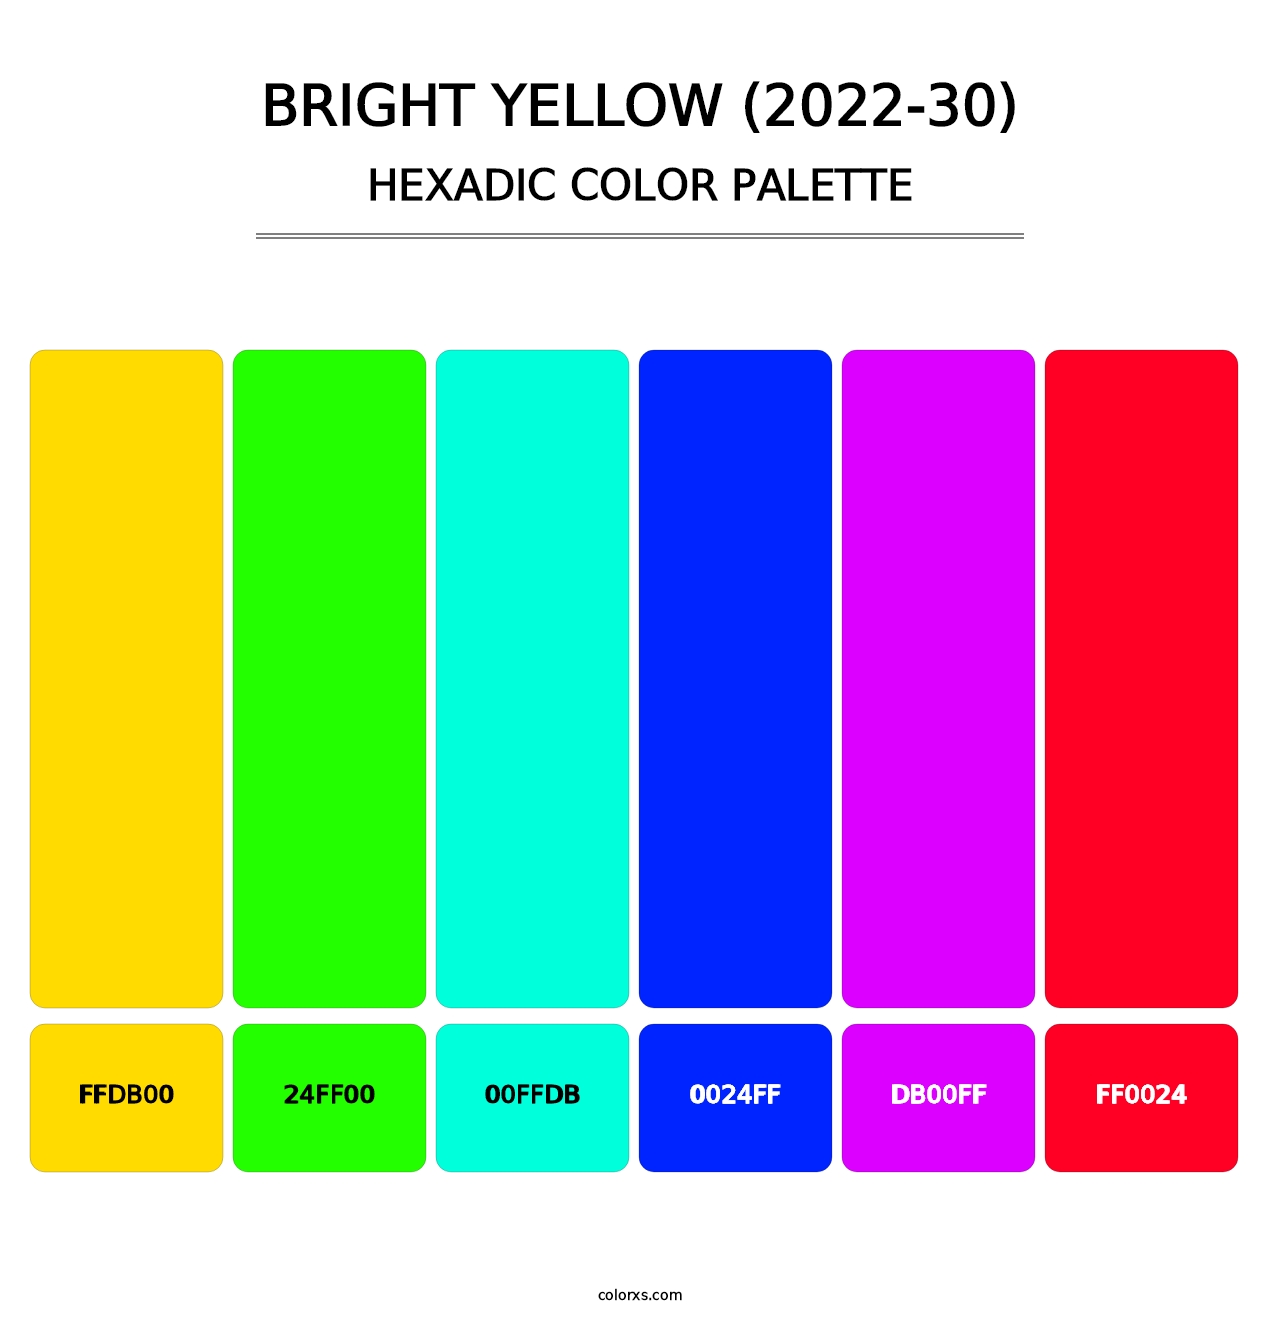 Bright Yellow (2022-30) - Hexadic Color Palette